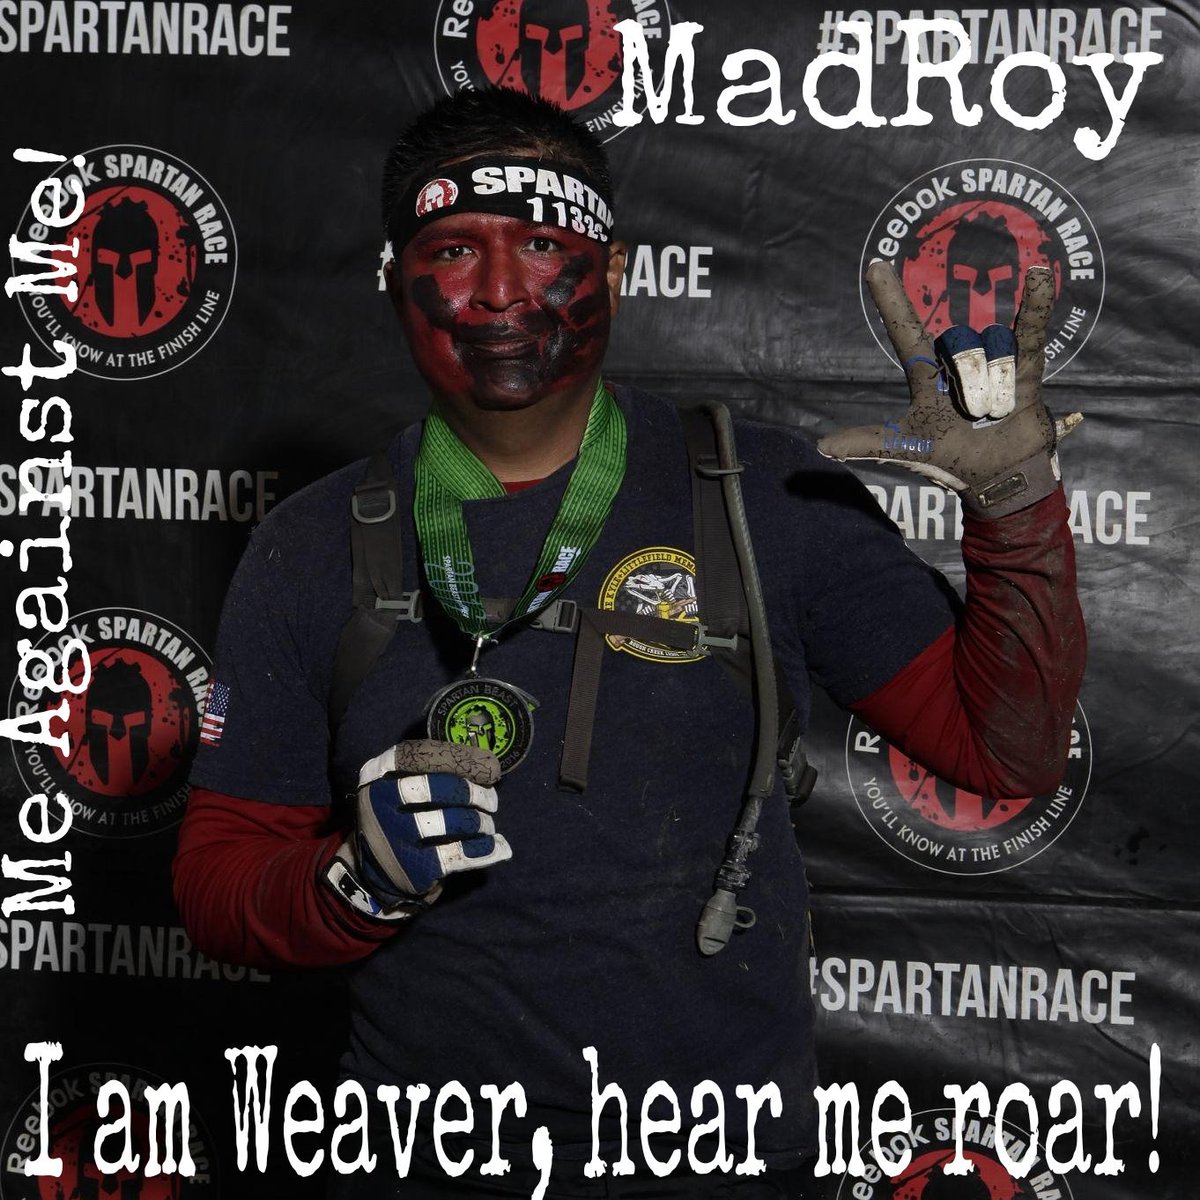 Why do I do OCR or trail races, I have my why's. #OCR #TrailRaces #MeAgainstMe #ShatterYourLimitations